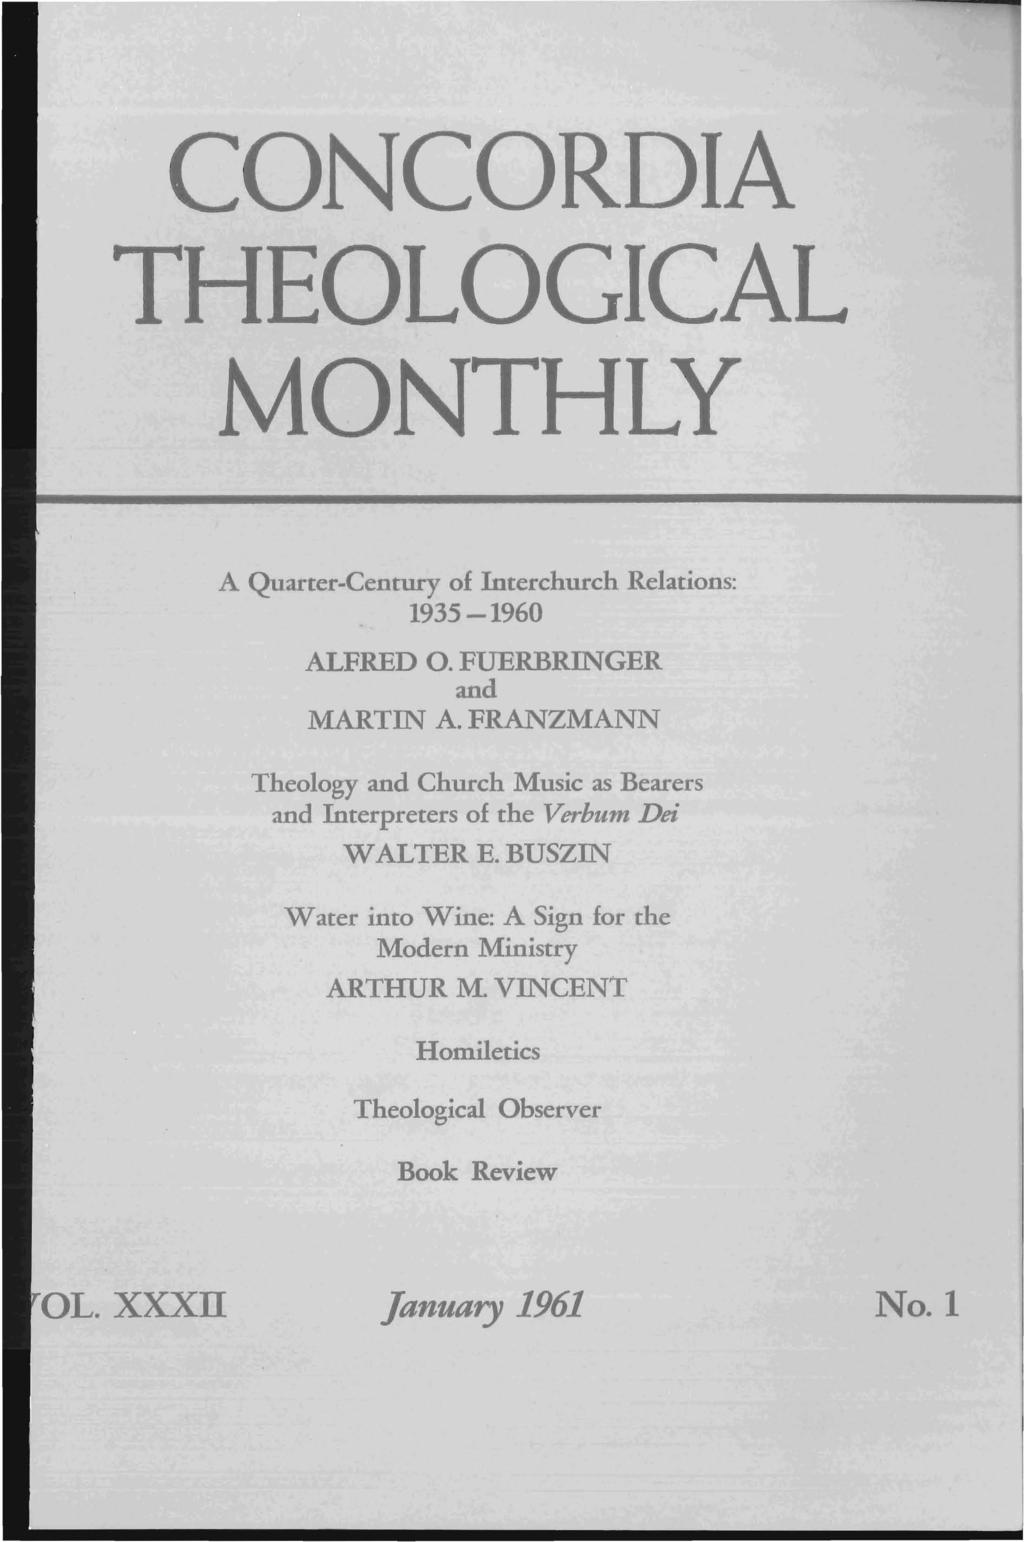 CONCORDIA THEOLOGICAL MONTHLY A Quarter-Century of Interchurch Relations: 1935-1960 ALFRED O. FUERBRINGER and MARTIN A.